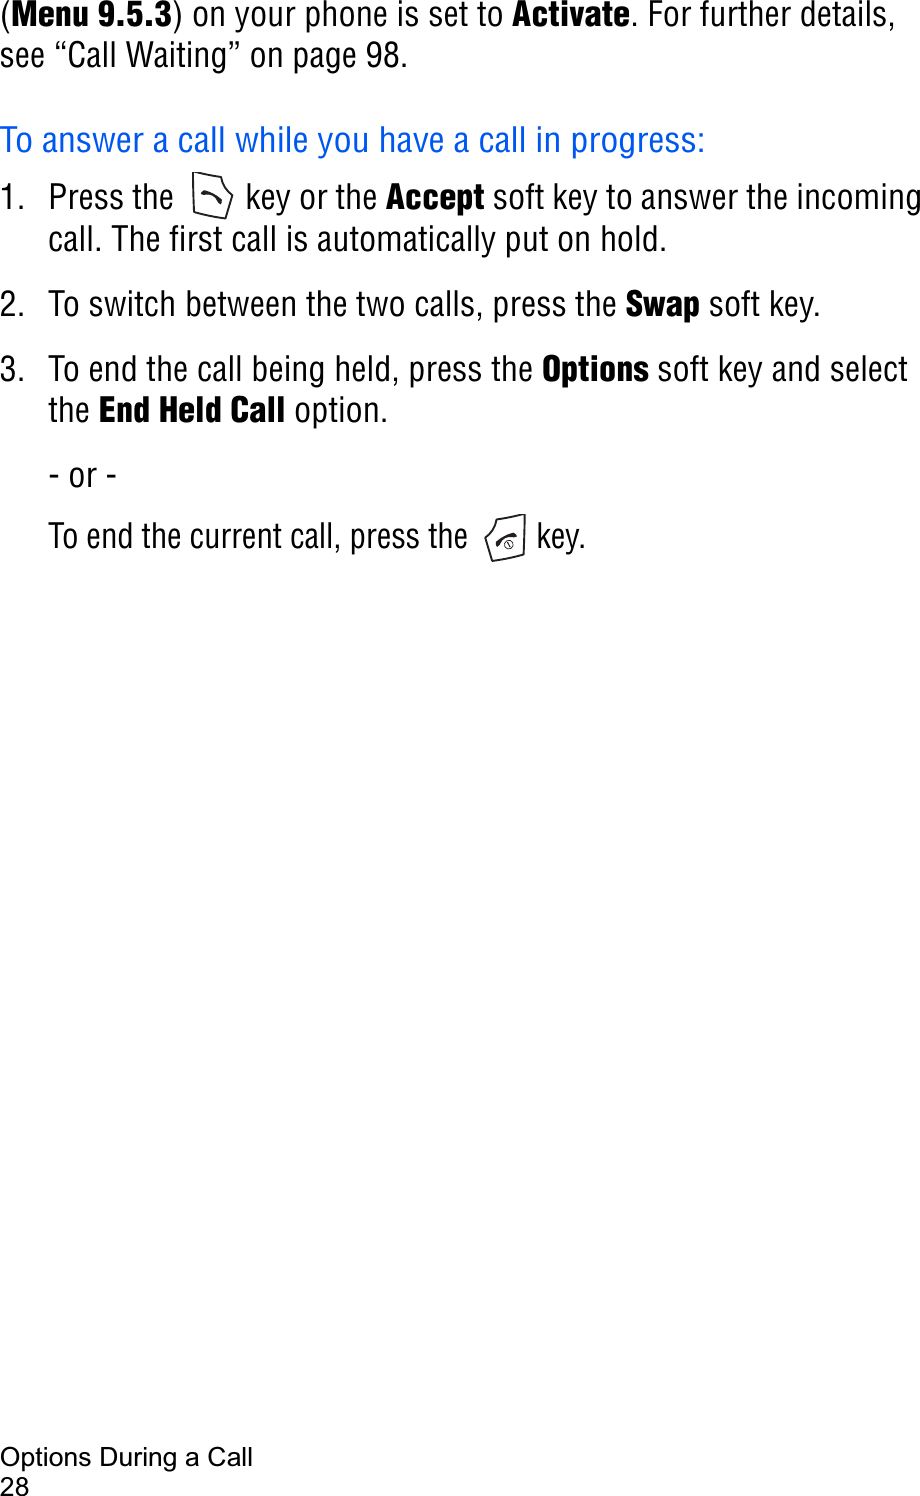 Options During a Call28(Menu 9.5.3) on your phone is set to Activate. For further details, see “Call Waiting” on page 98.To answer a call while you have a call in progress:1. Press the   key or the Accept soft key to answer the incoming call. The first call is automatically put on hold.2. To switch between the two calls, press the Swap soft key.3. To end the call being held, press the Options soft key and select the End Held Call option.- or -To end the current call, press the   key.